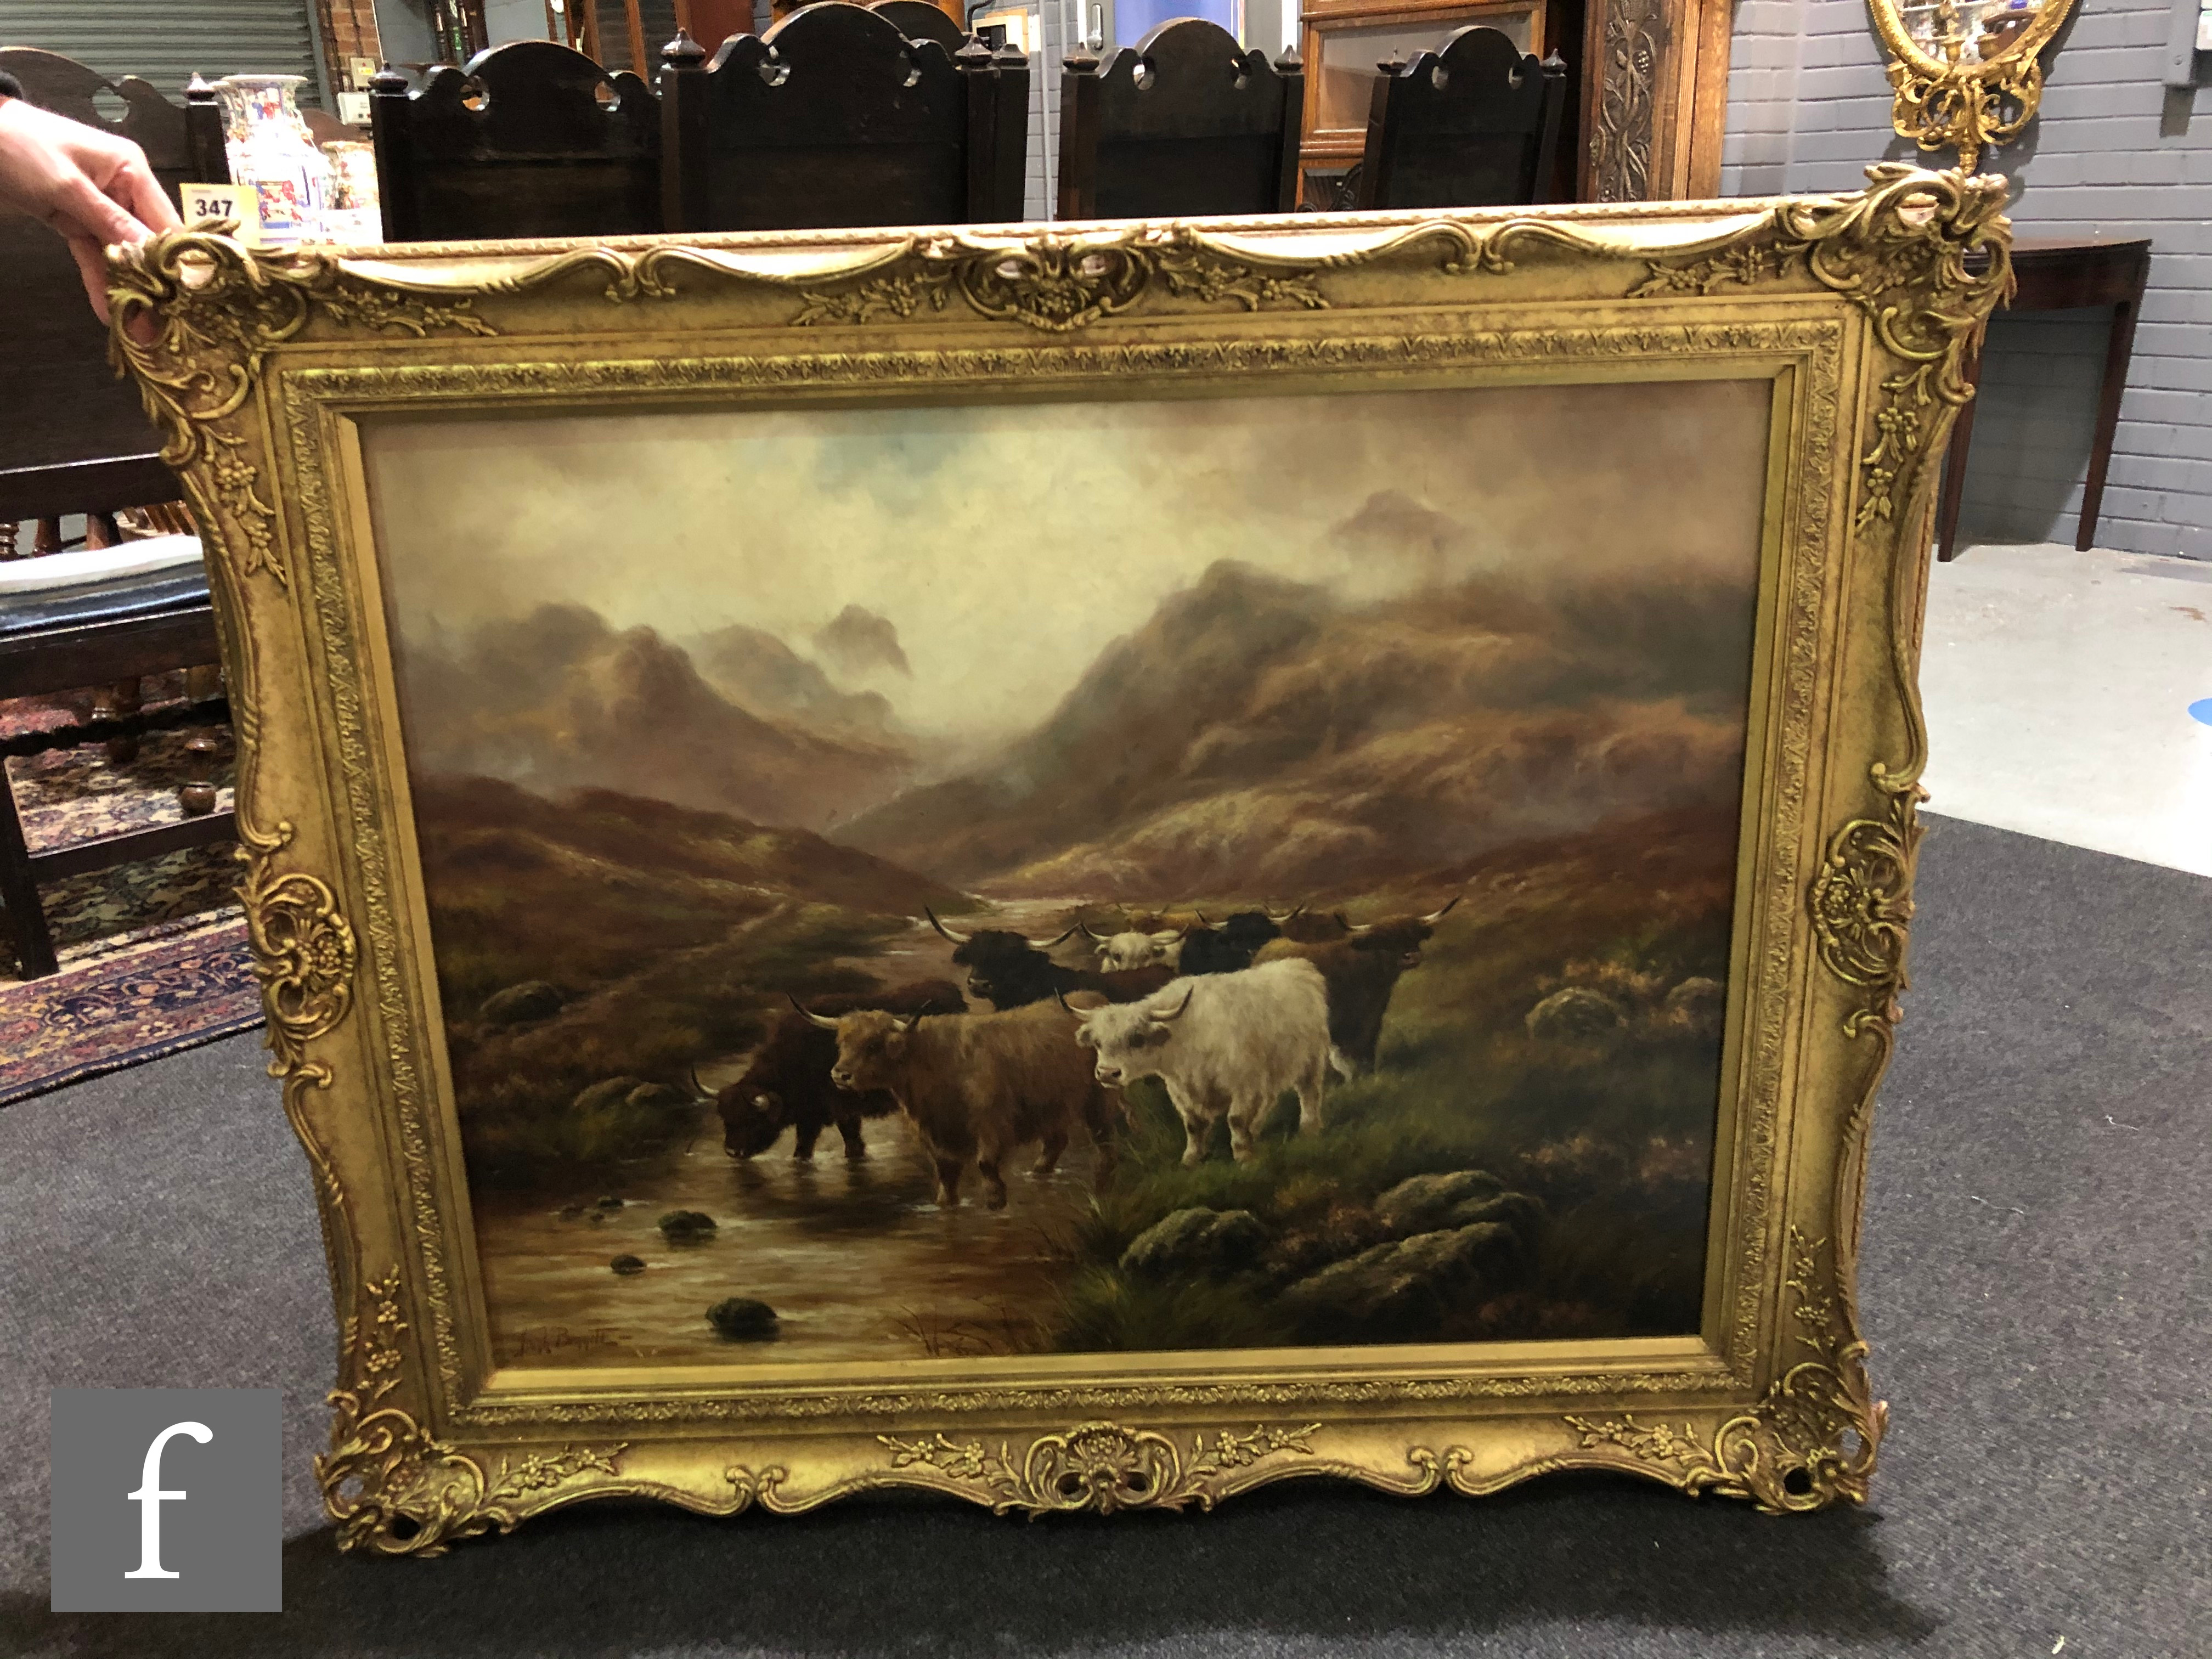 FRANK BENNETT (LATE 19TH CENTURY) - Cattle in a Highland river landscape, oil on canvas, signed, - Image 2 of 6